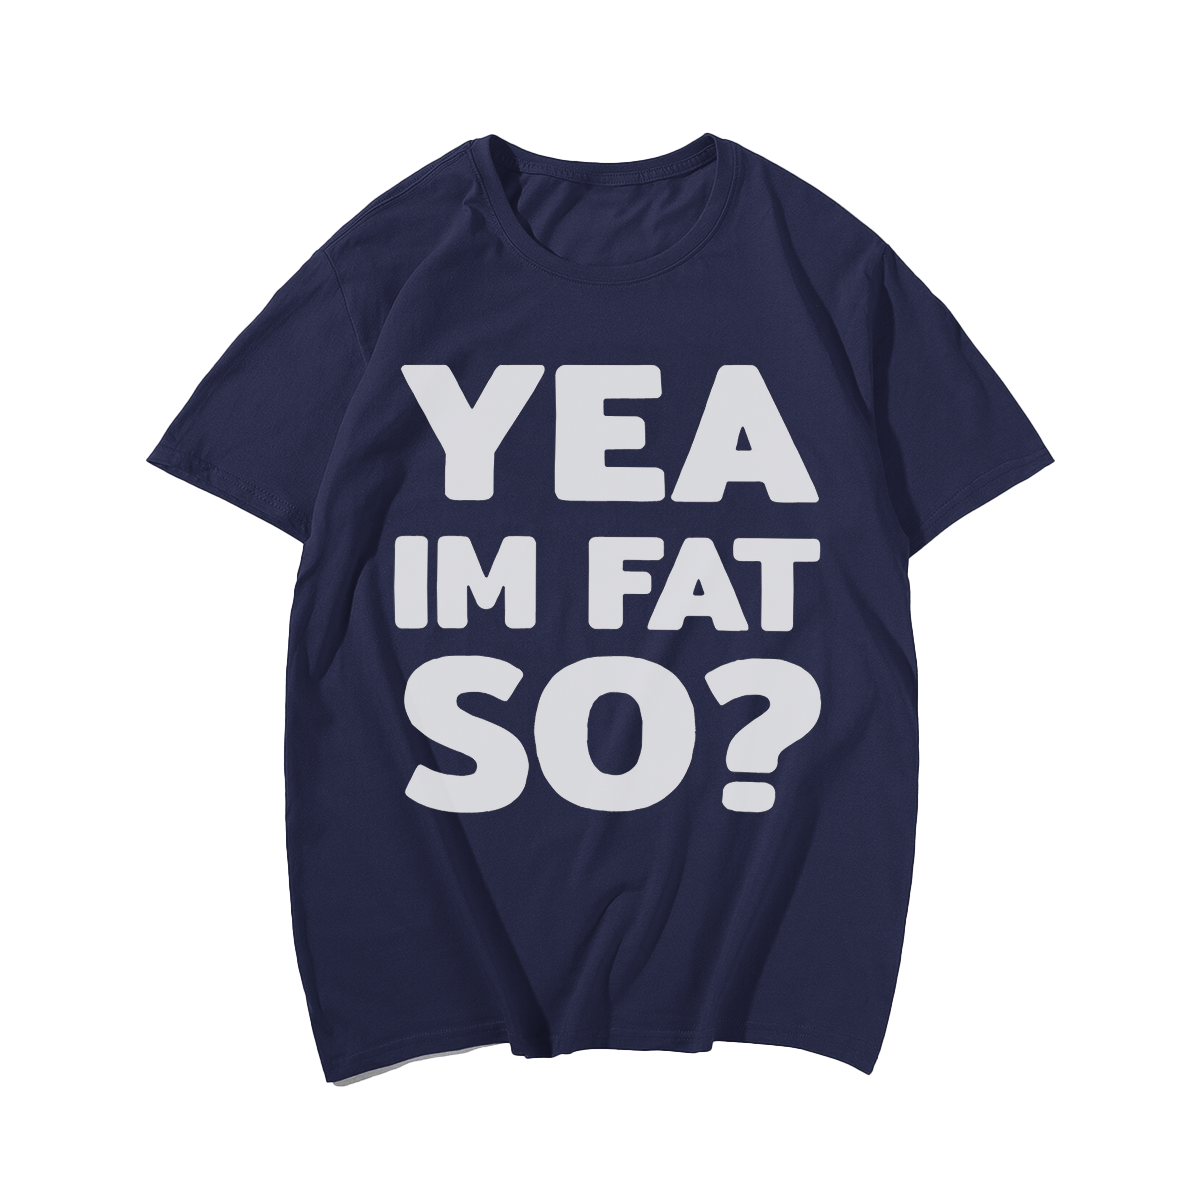 Yea Im Fat.So? T-shirt for Men, Oversize Plus Size Man Clothing - Big Tall Men Must Have